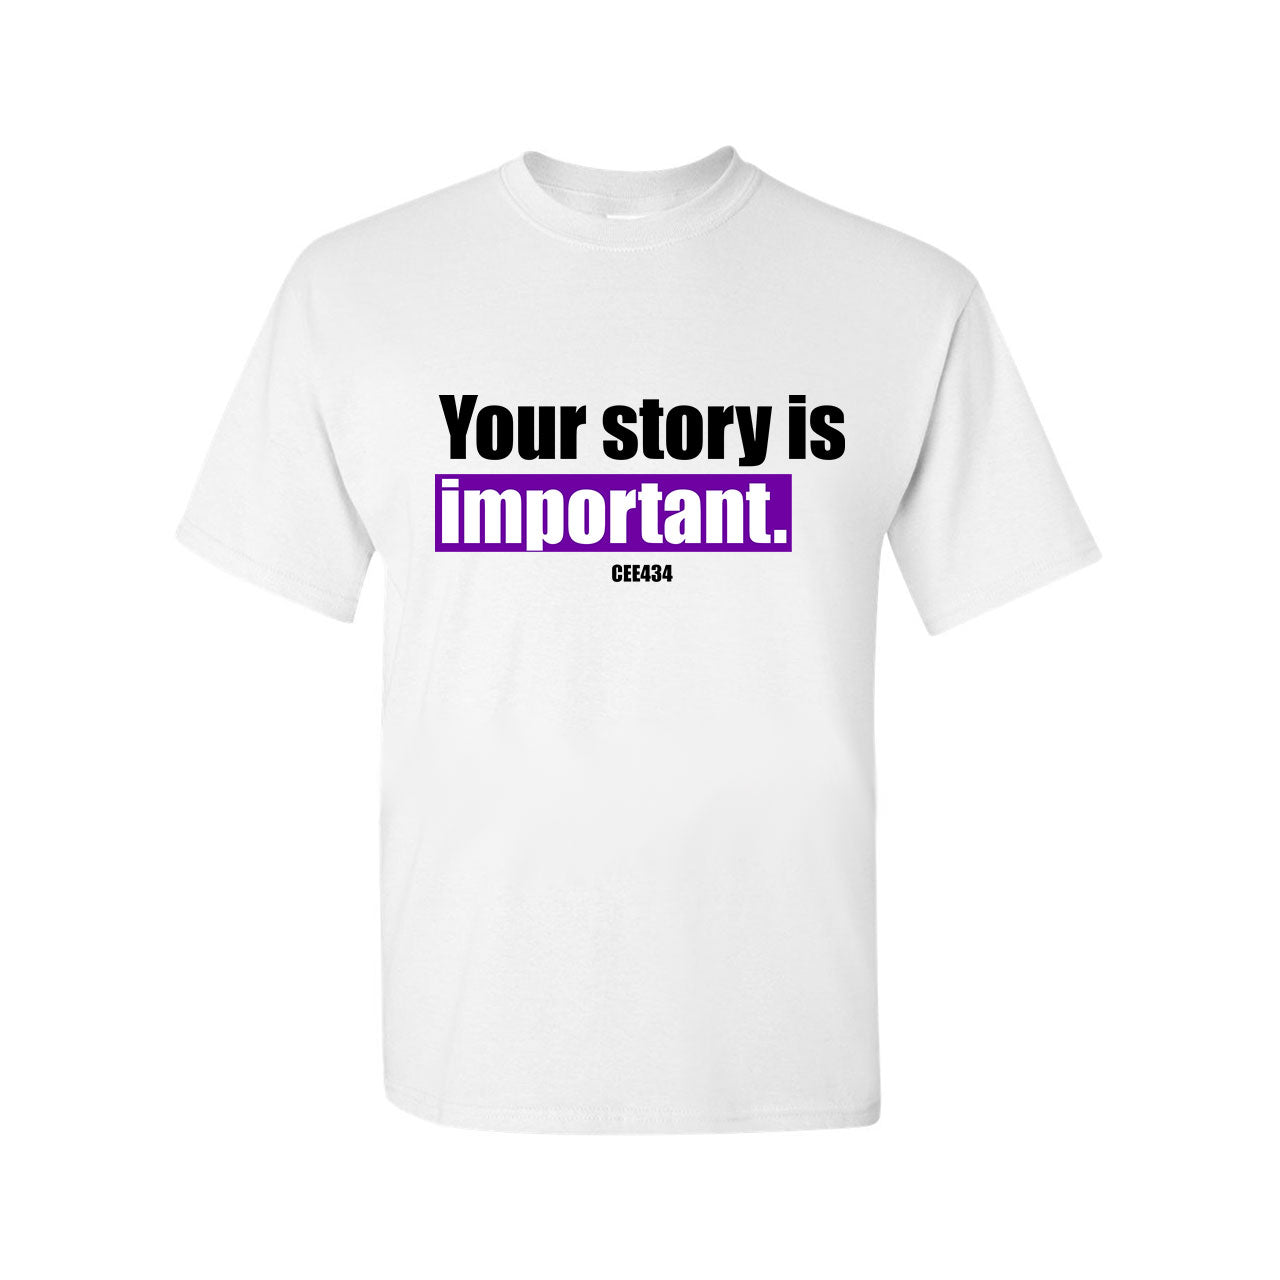 The Your Story is Important Tee